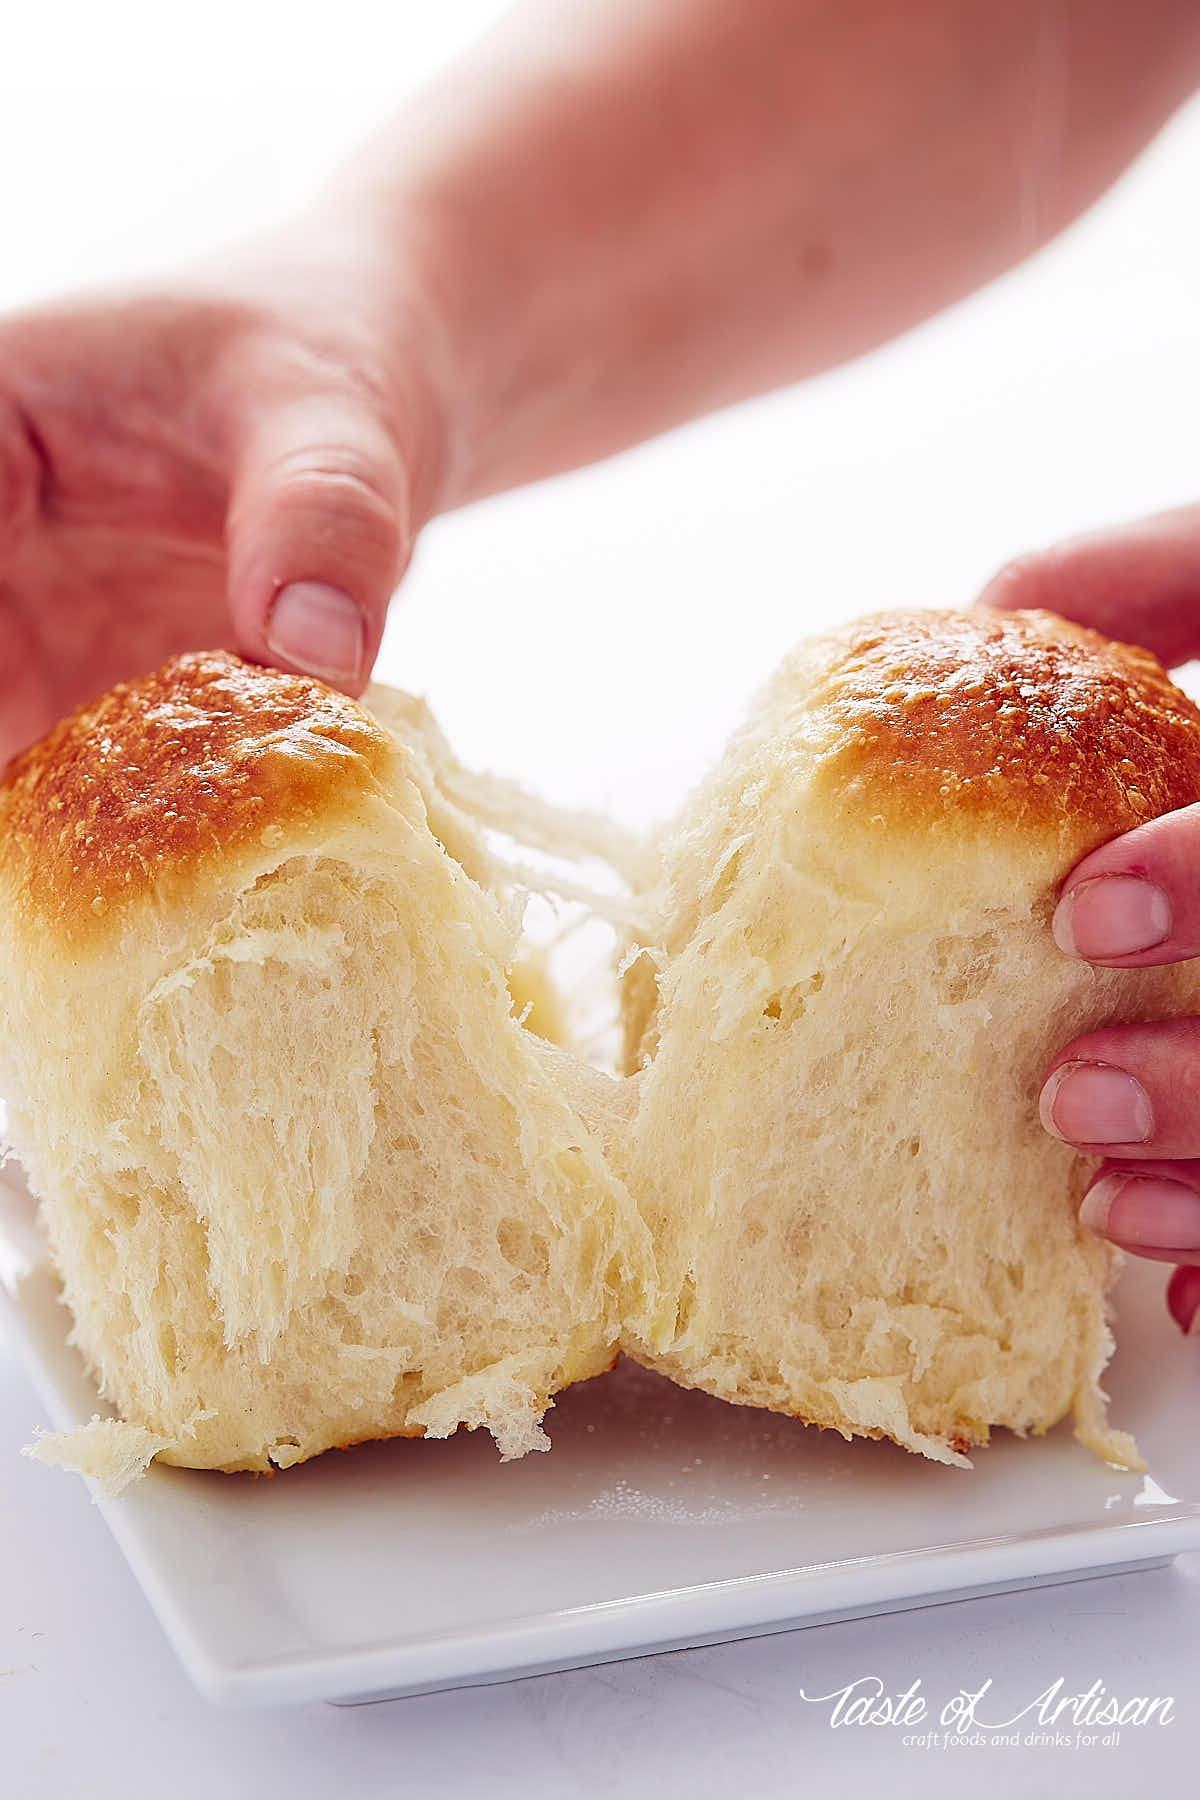 Two hands pulling two yeast rolls apart, flaky dough visible.